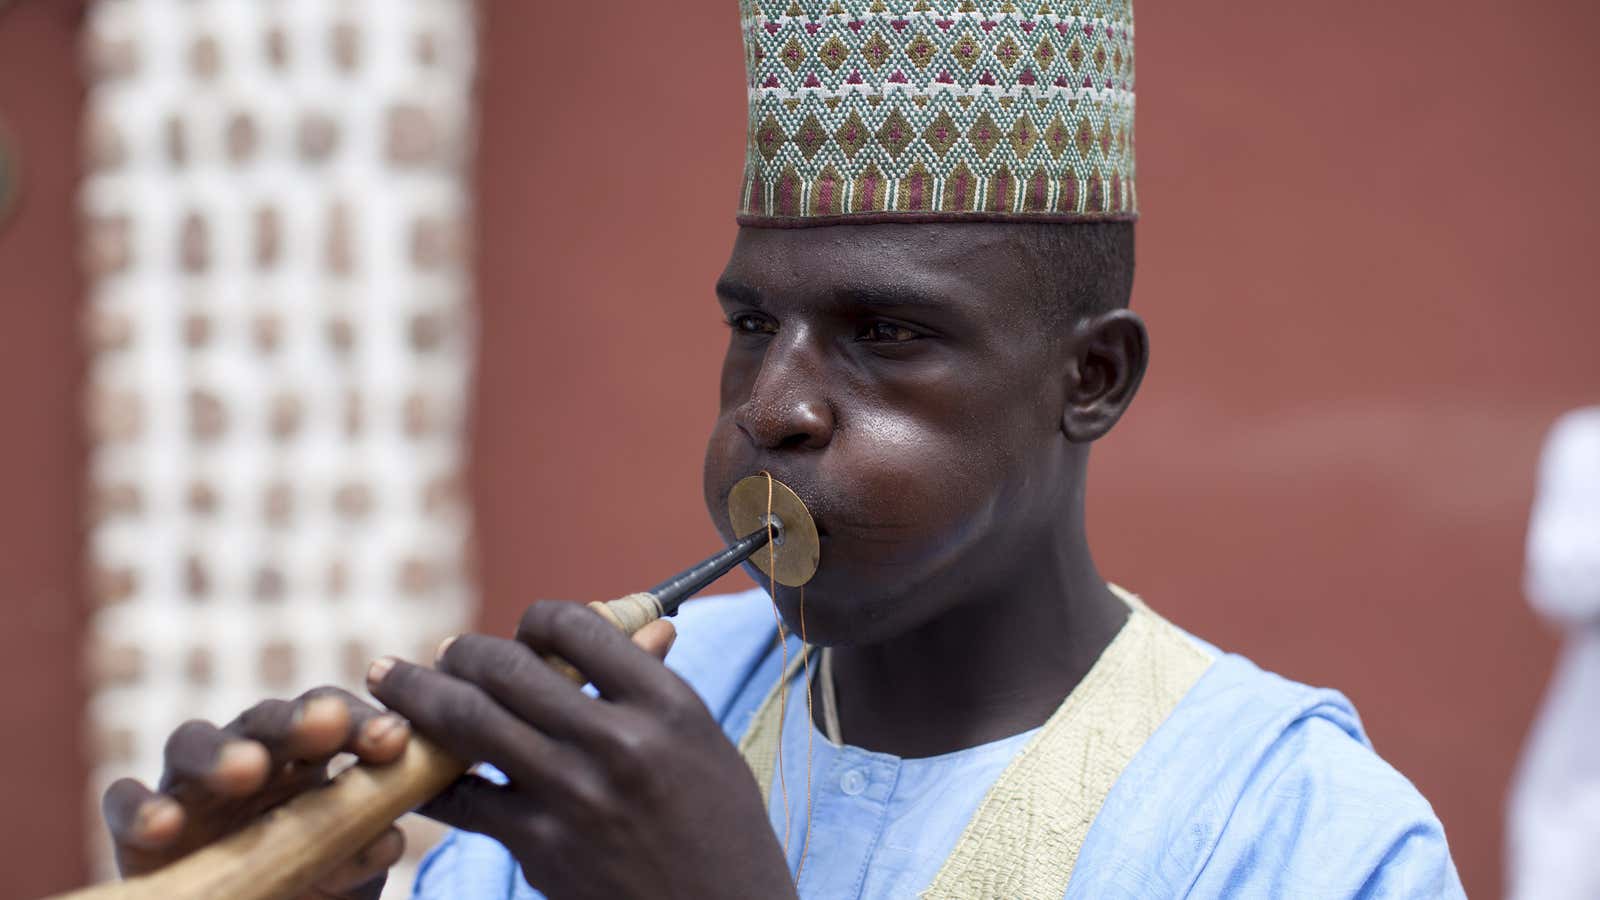 A griot plays a horned instrument at the emir’s palace in Kano, Nigeria